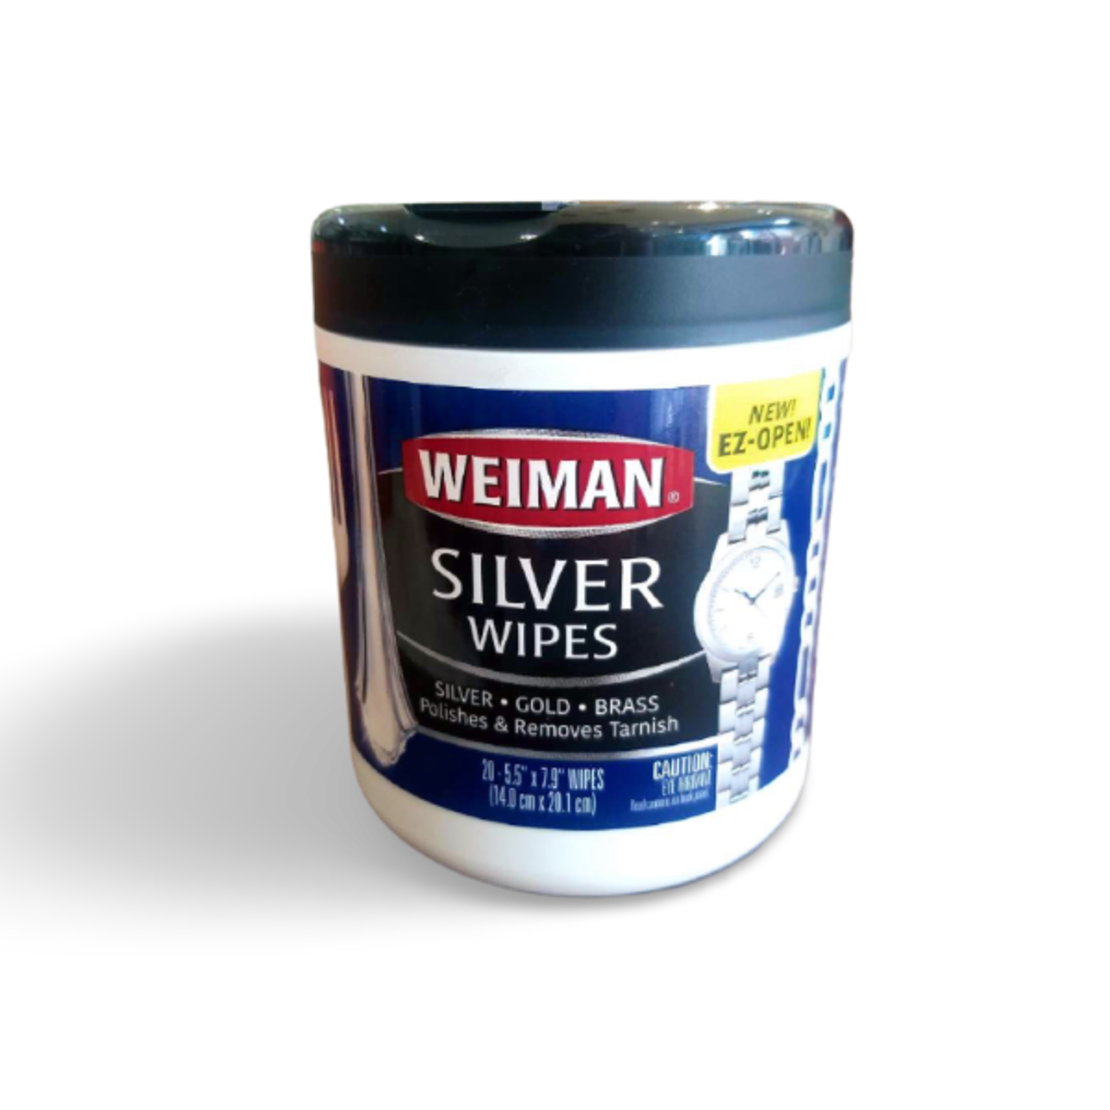 Wipes for cleaning silverware